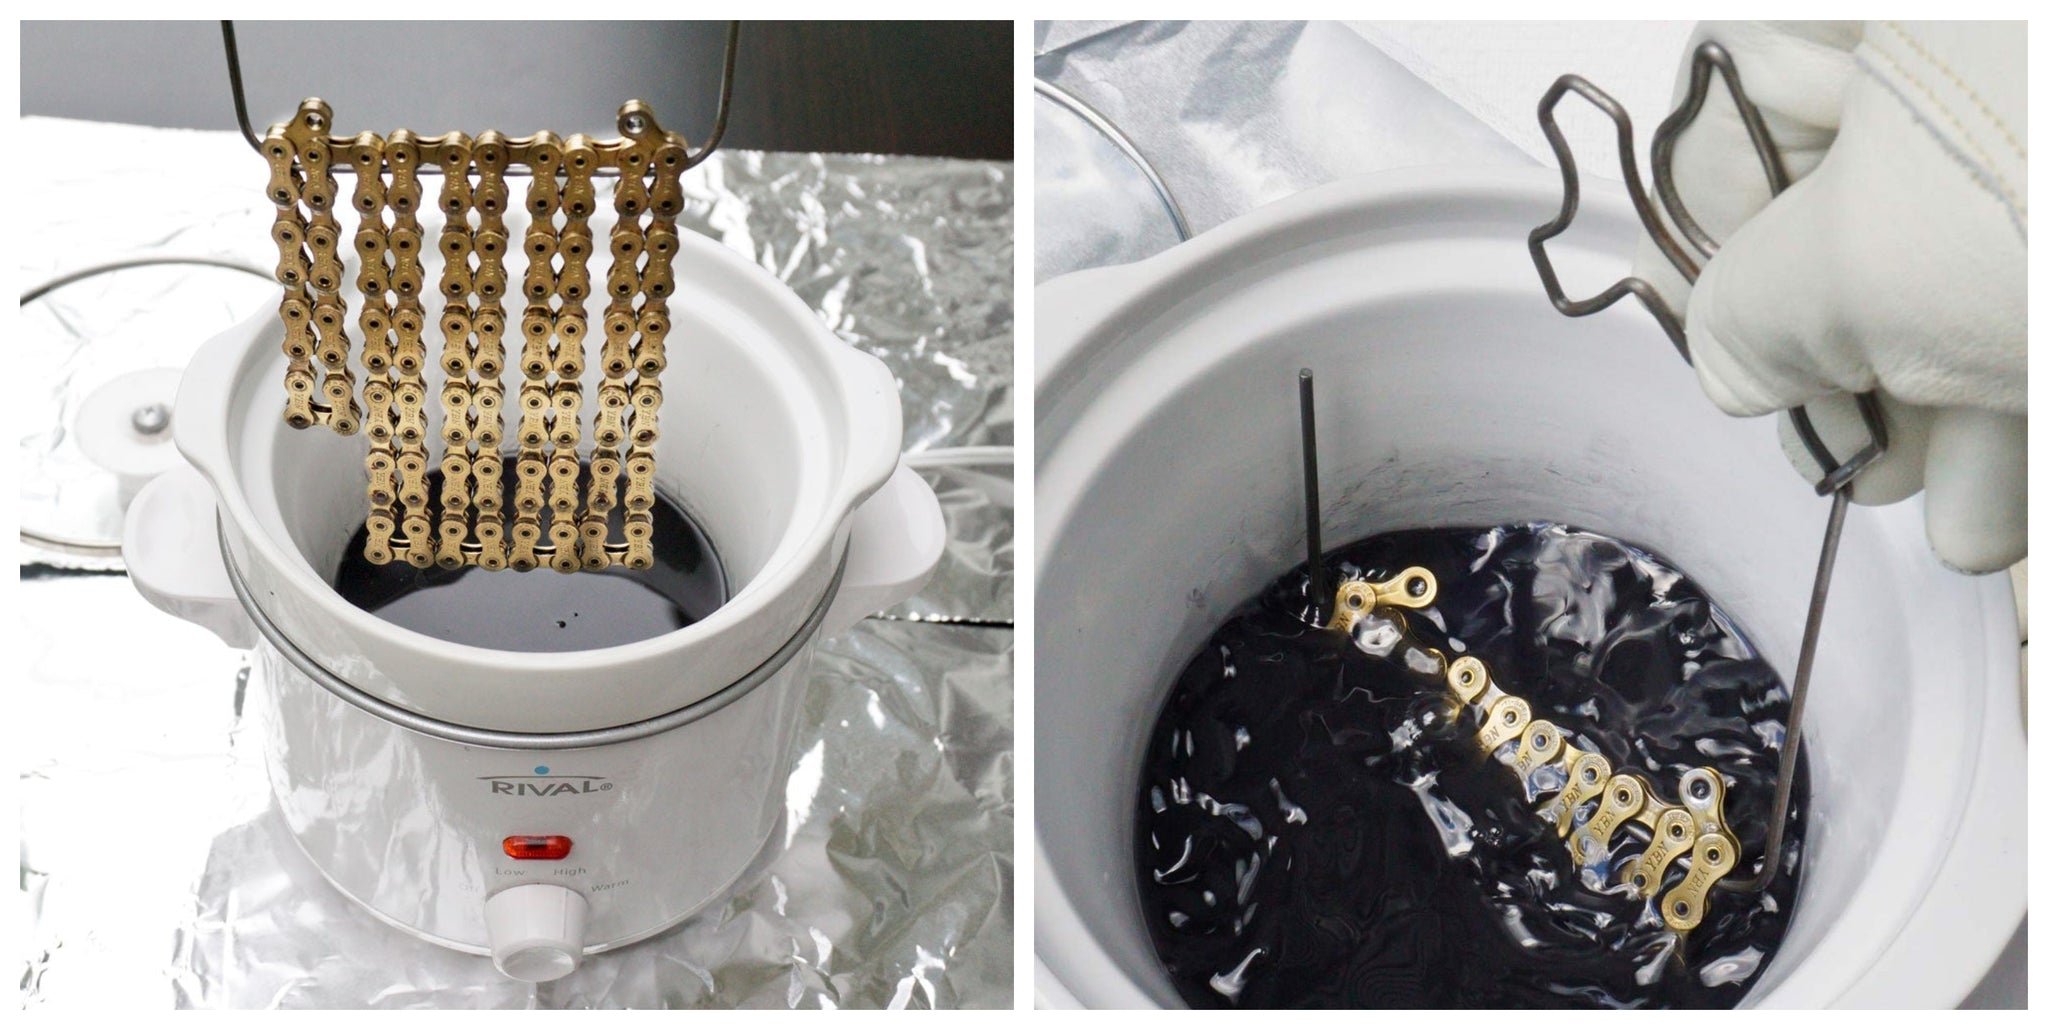 Molten speed wax chain waxing in slow cooker